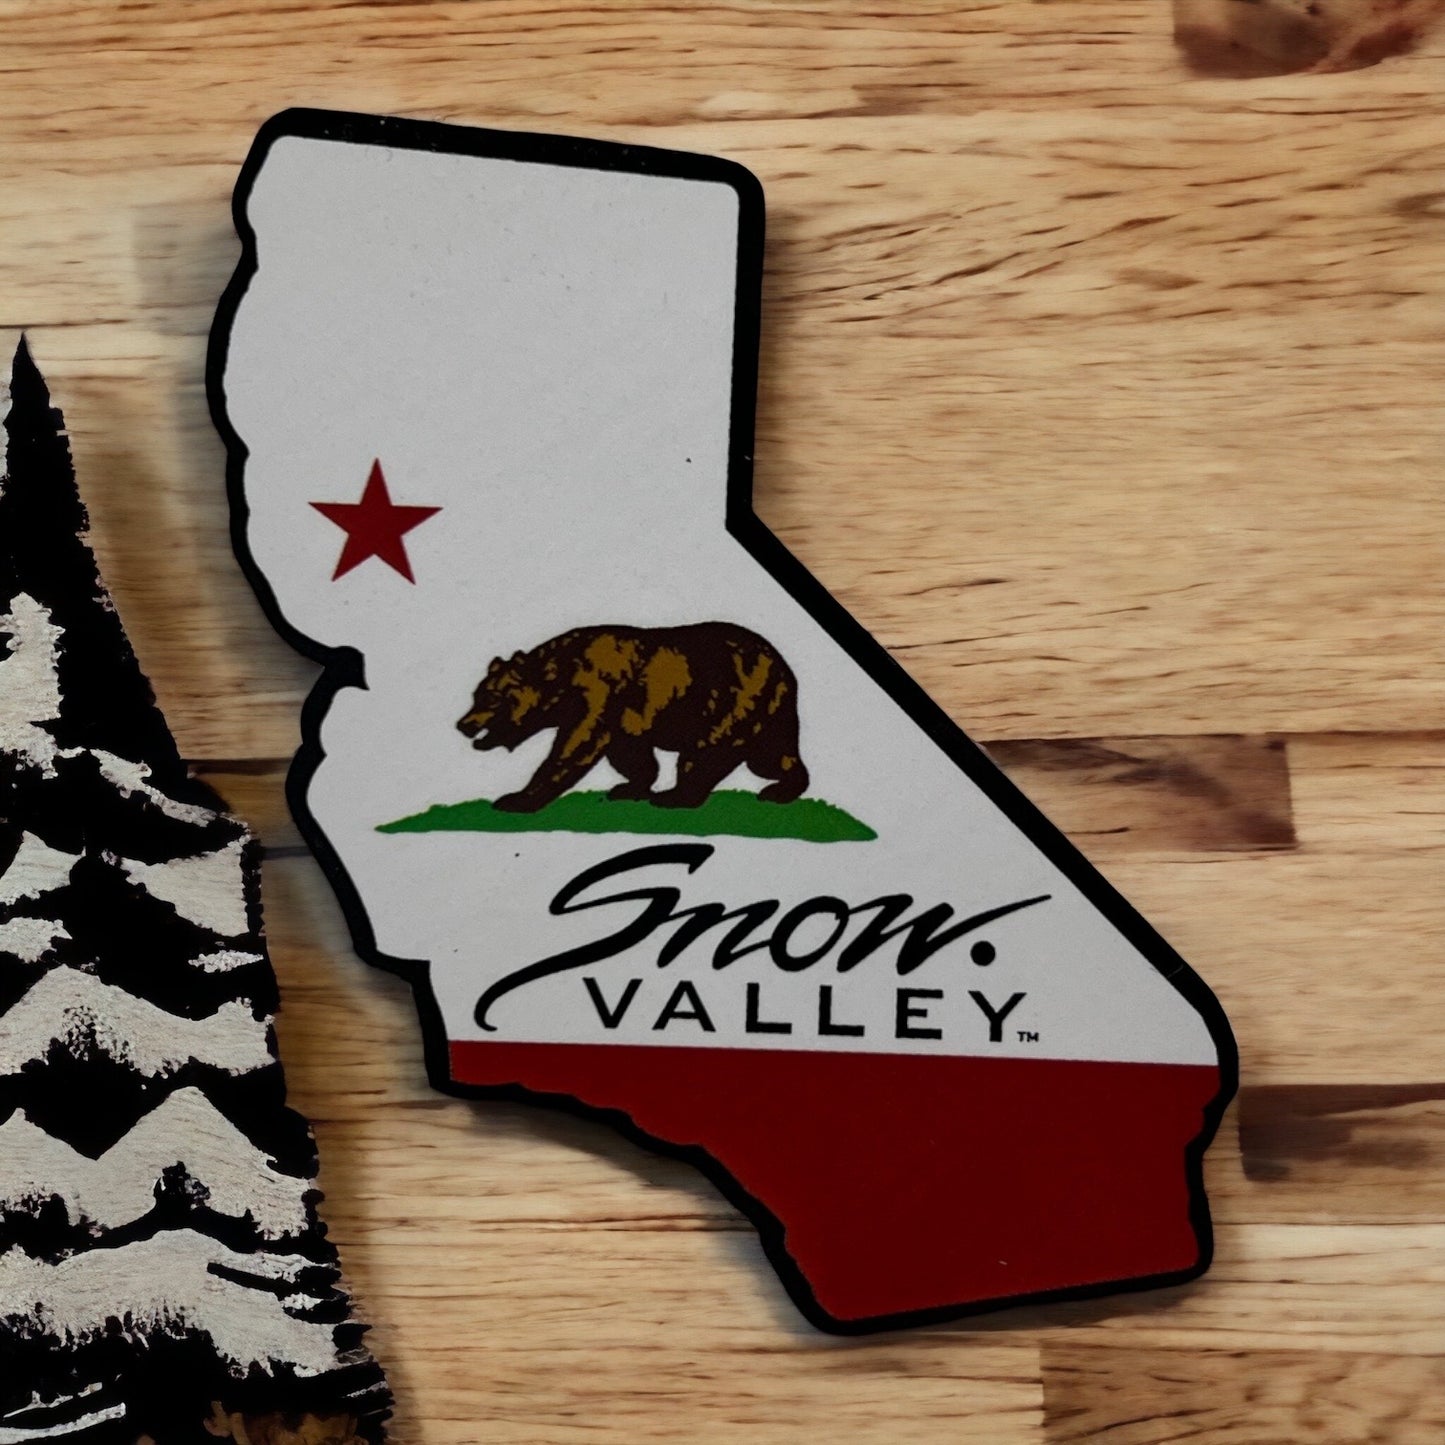 California shaped magnet with Snow Valley logo and bear